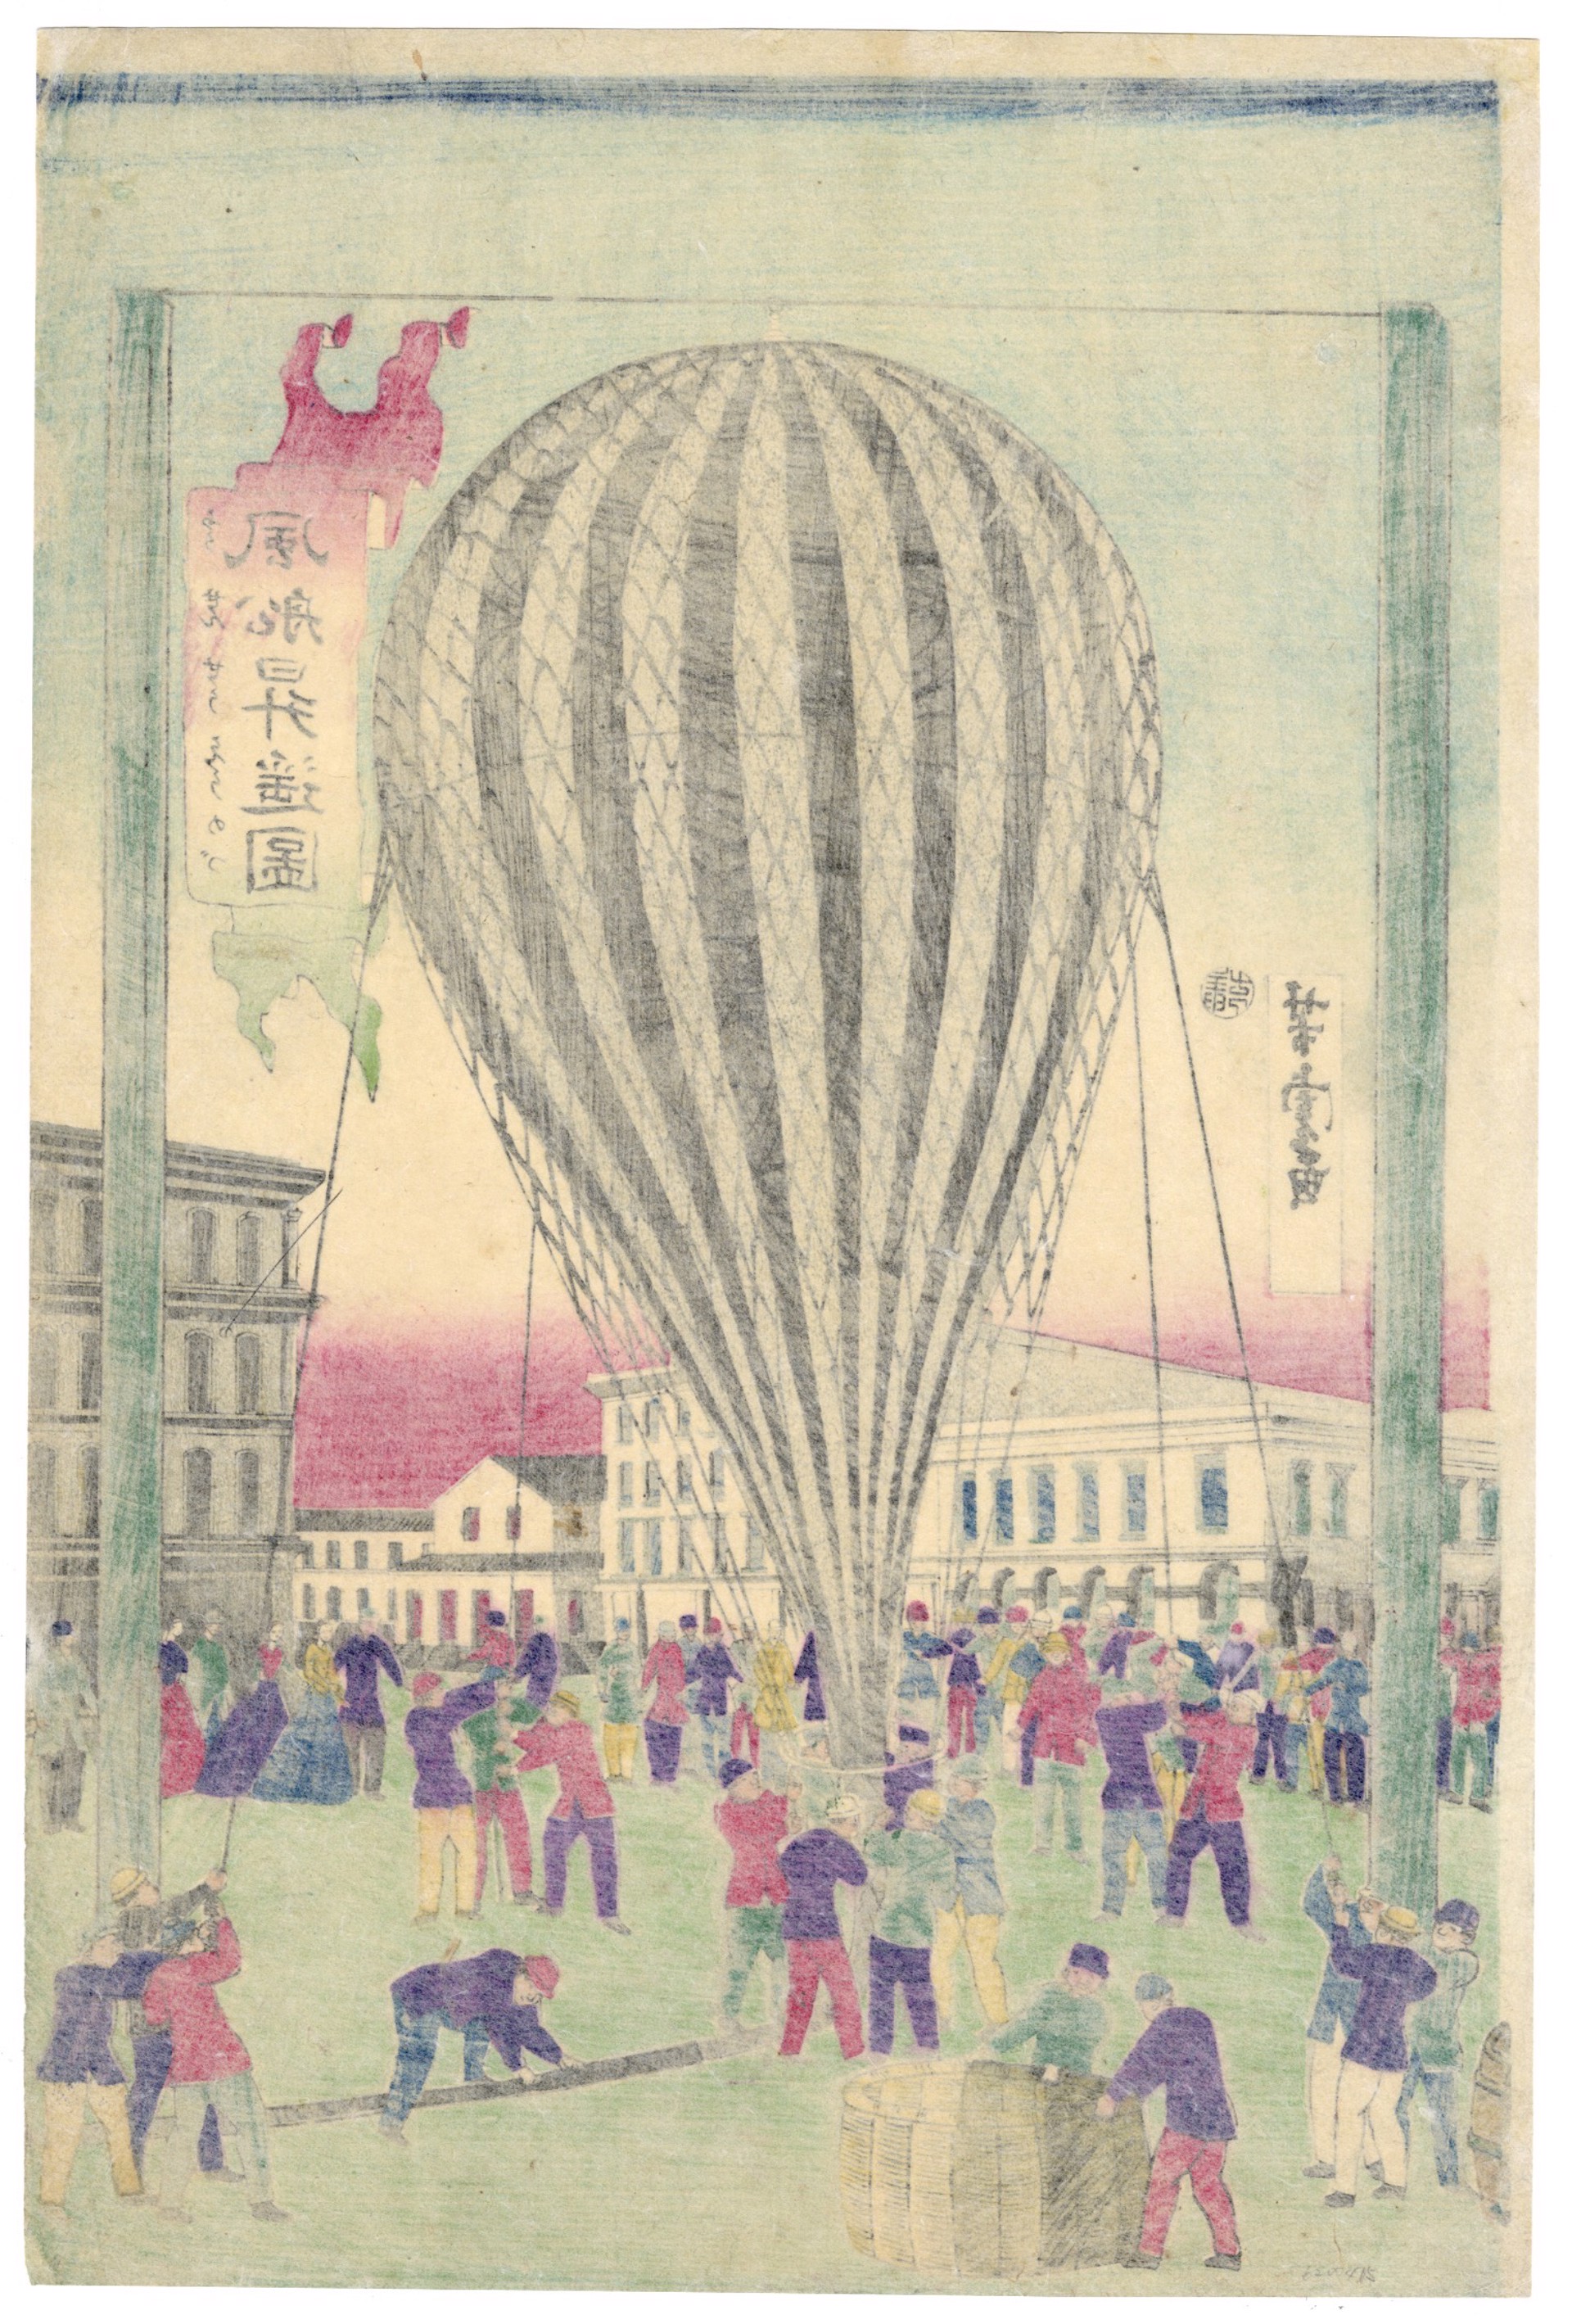 Scene of Balloon Ascentions by Yoshitora